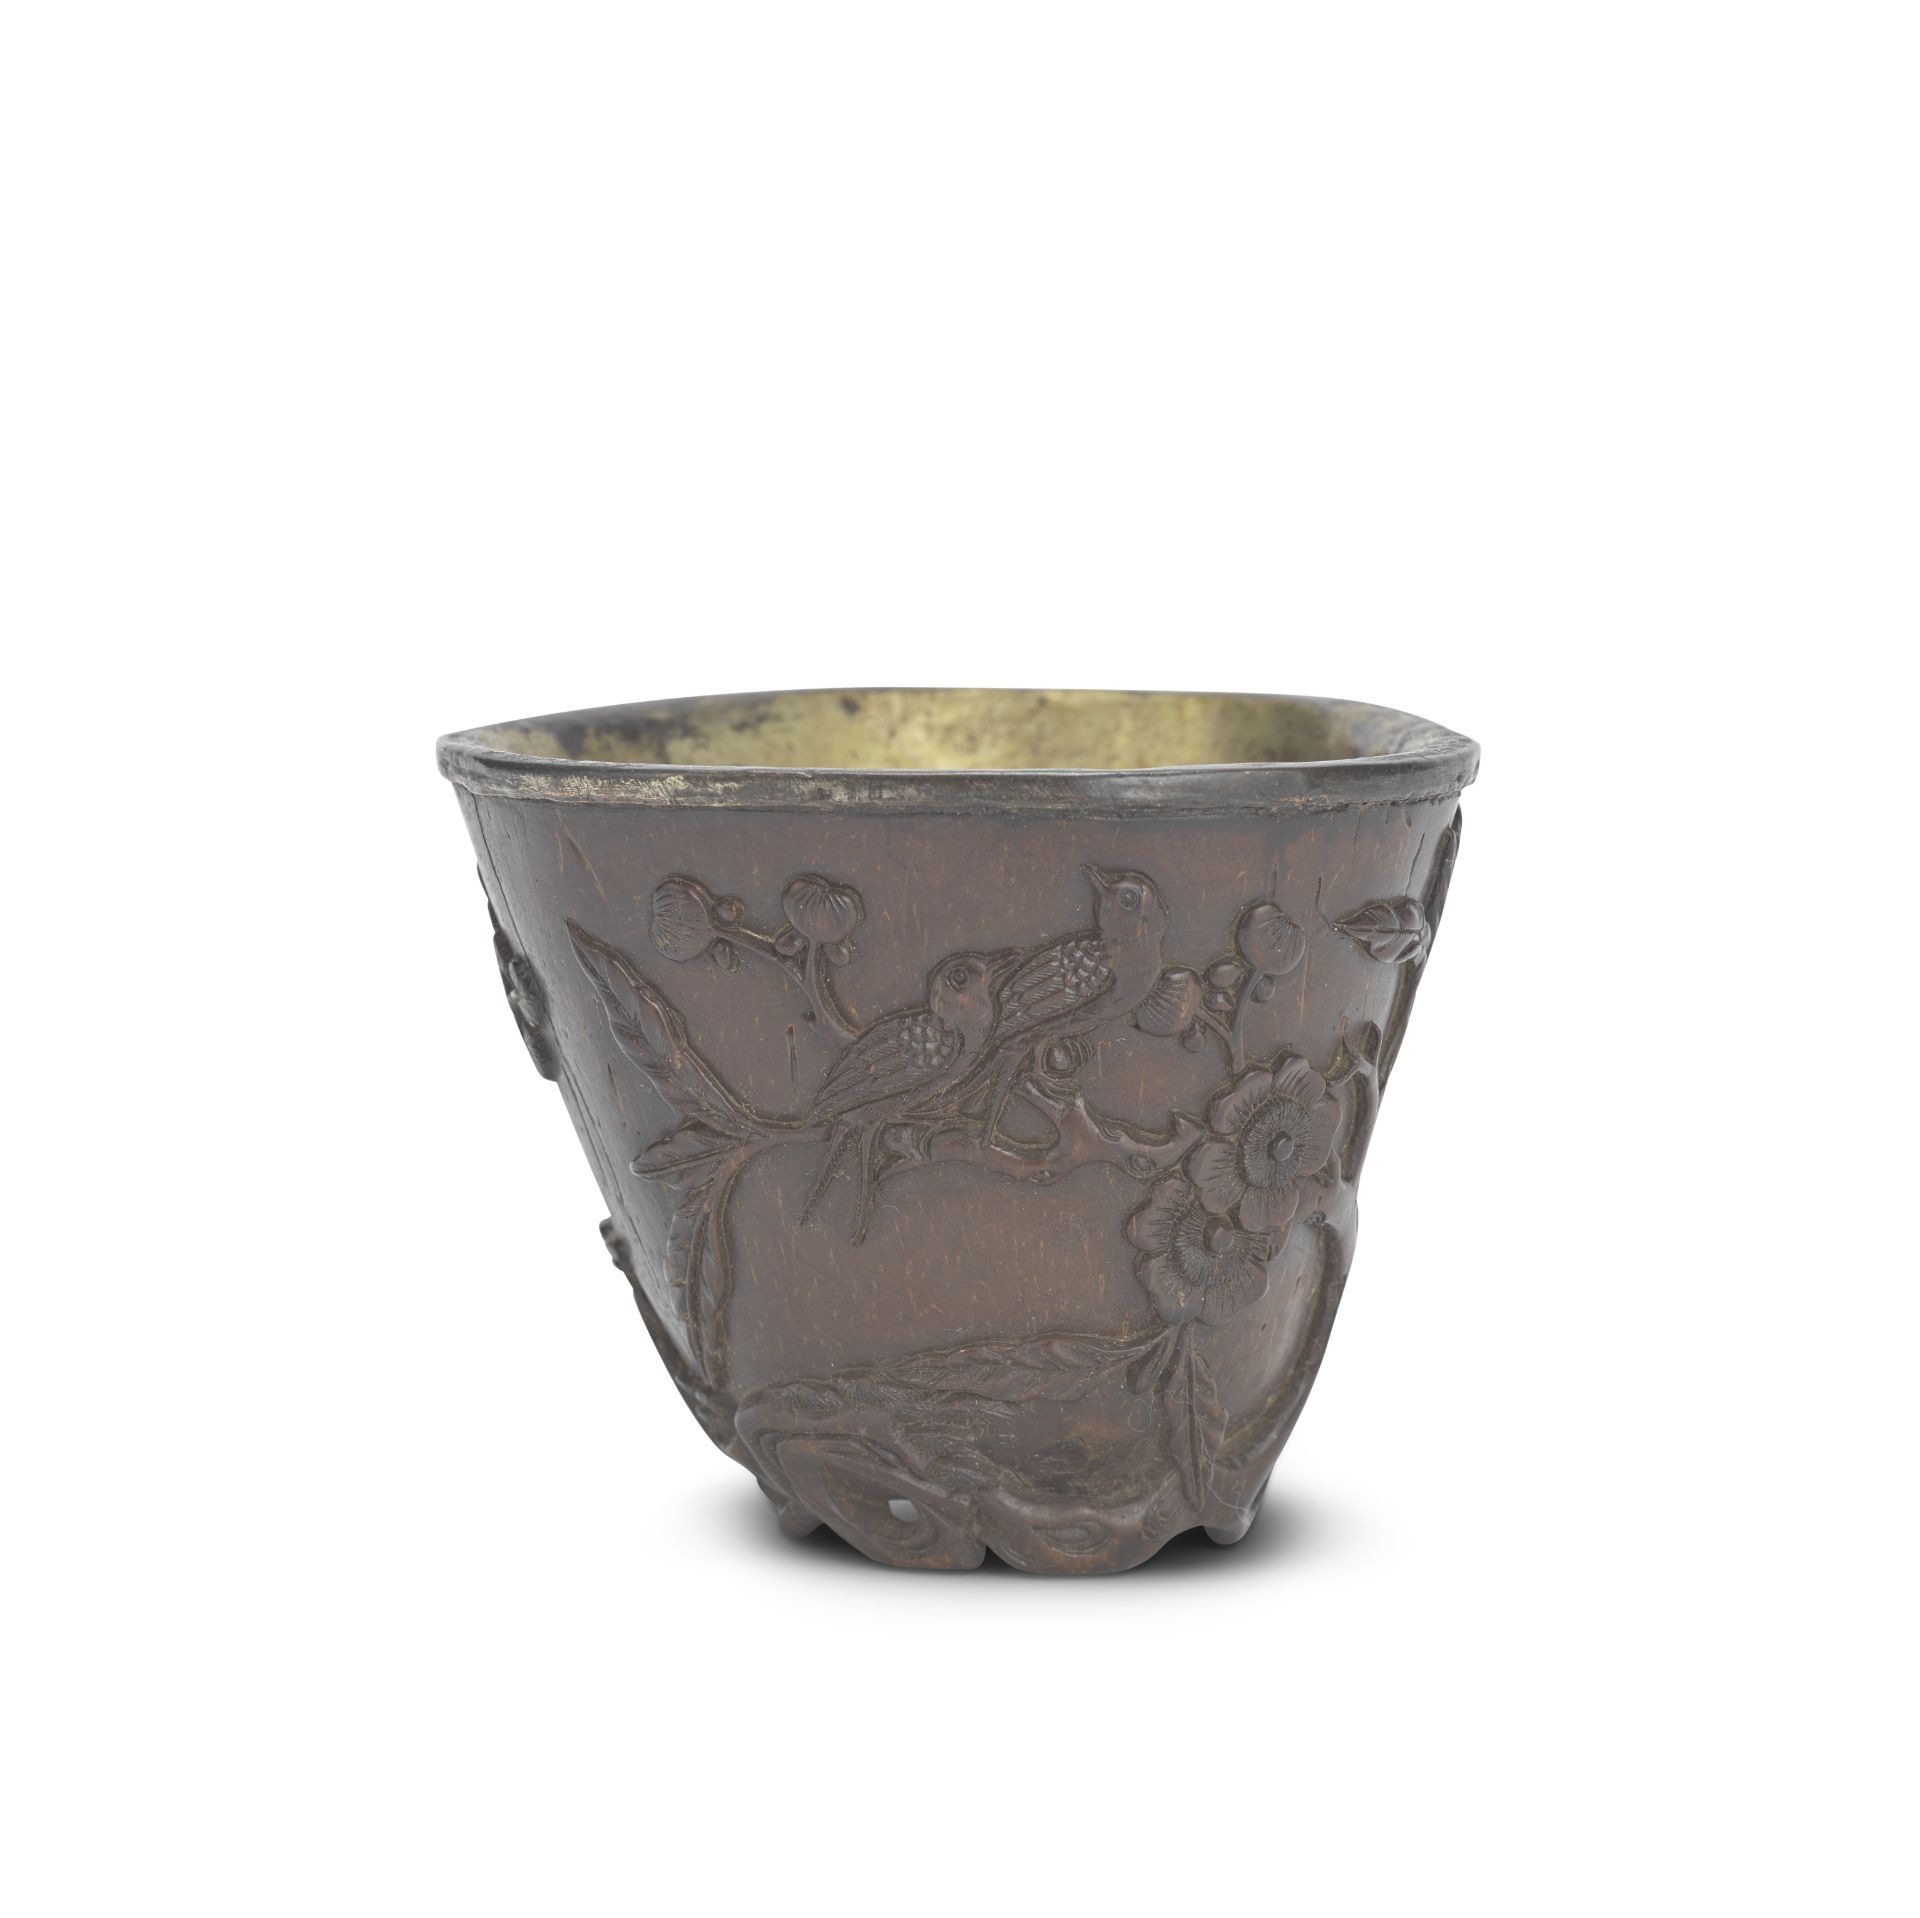 A CARVED COCONUT CUP Kangxi